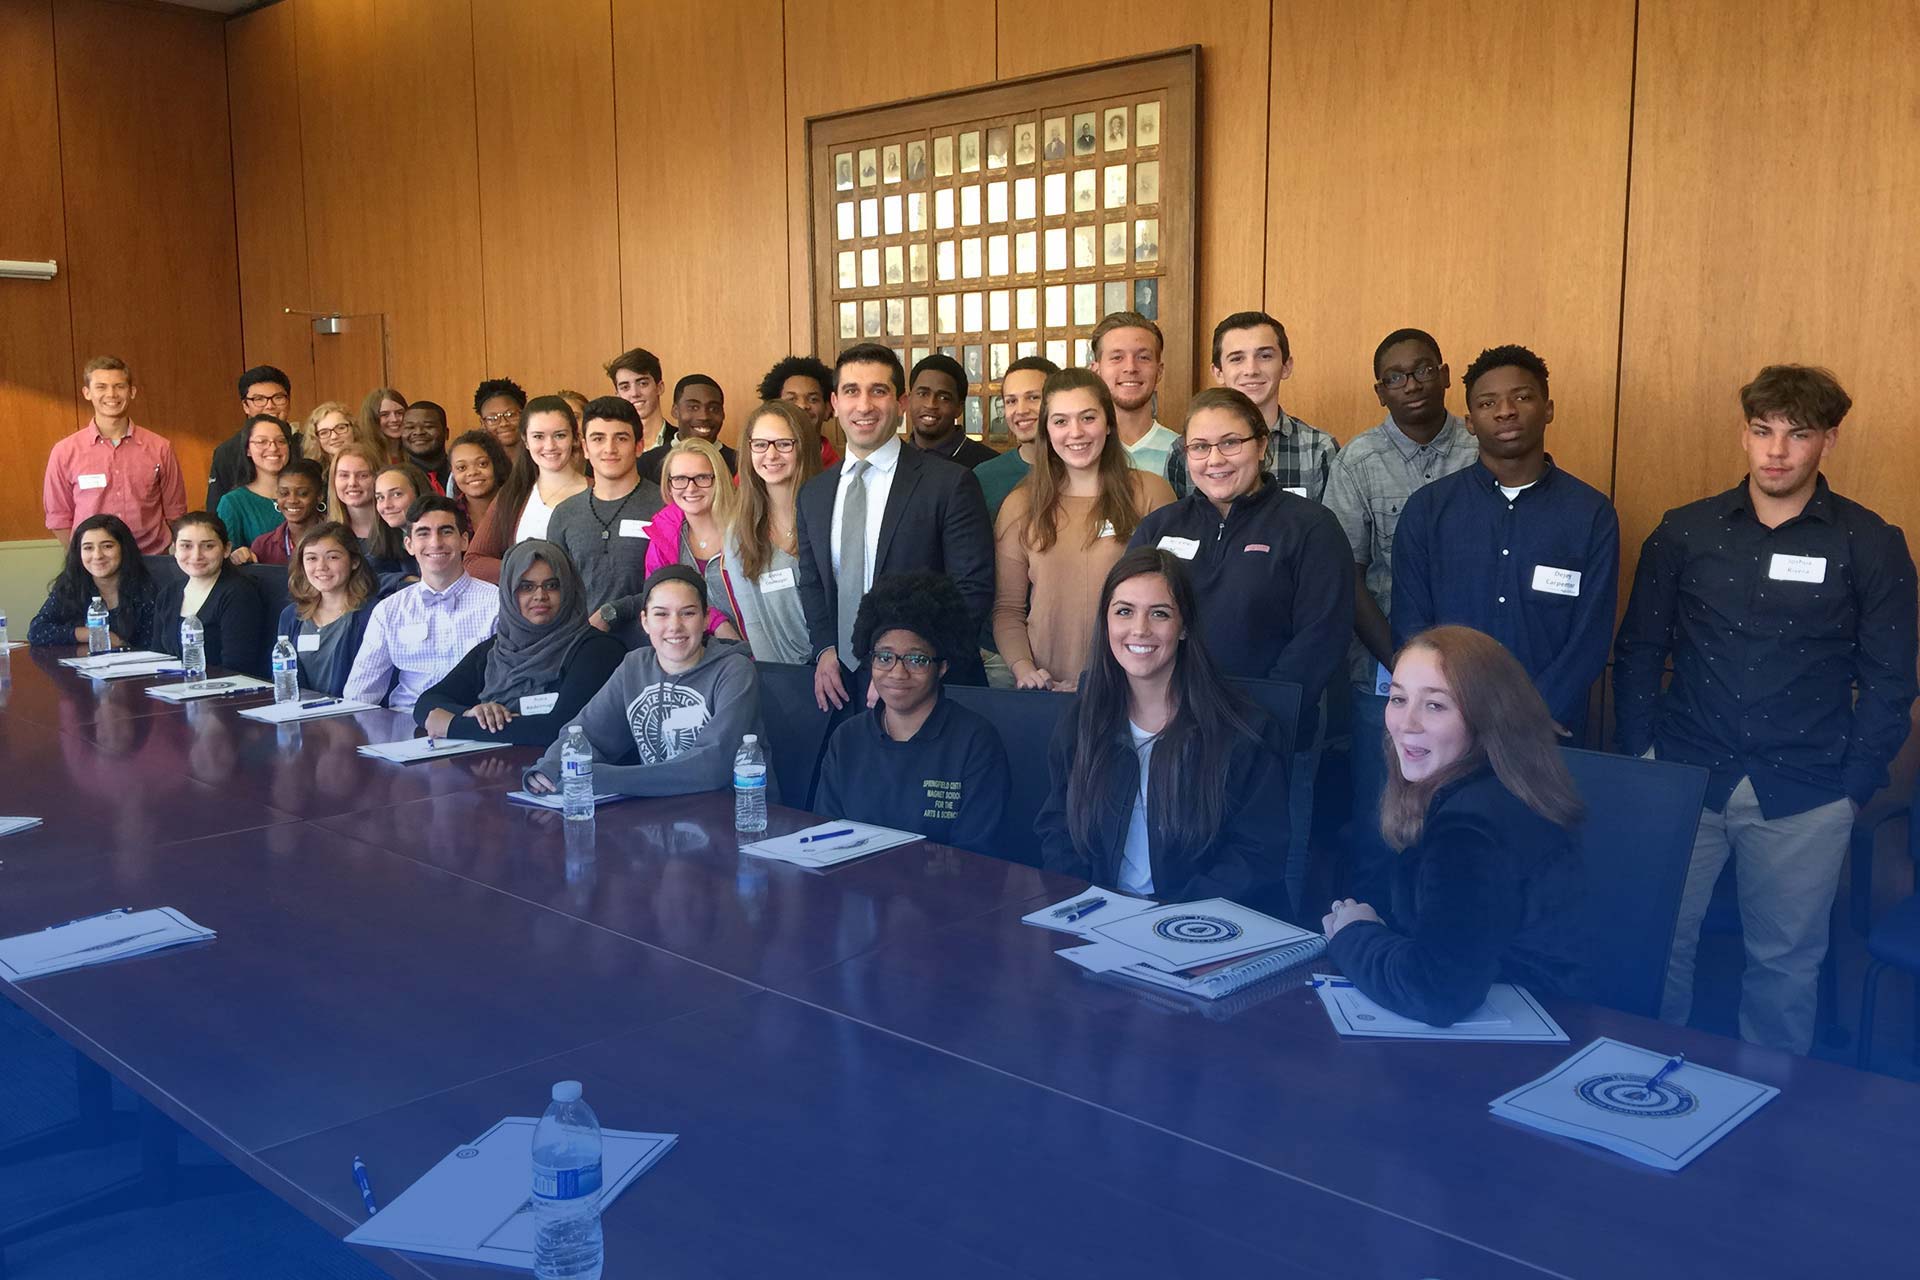 Hampden District Attorney Anthony Gulluni poses for a photo with a group of young adults in a boardroom.